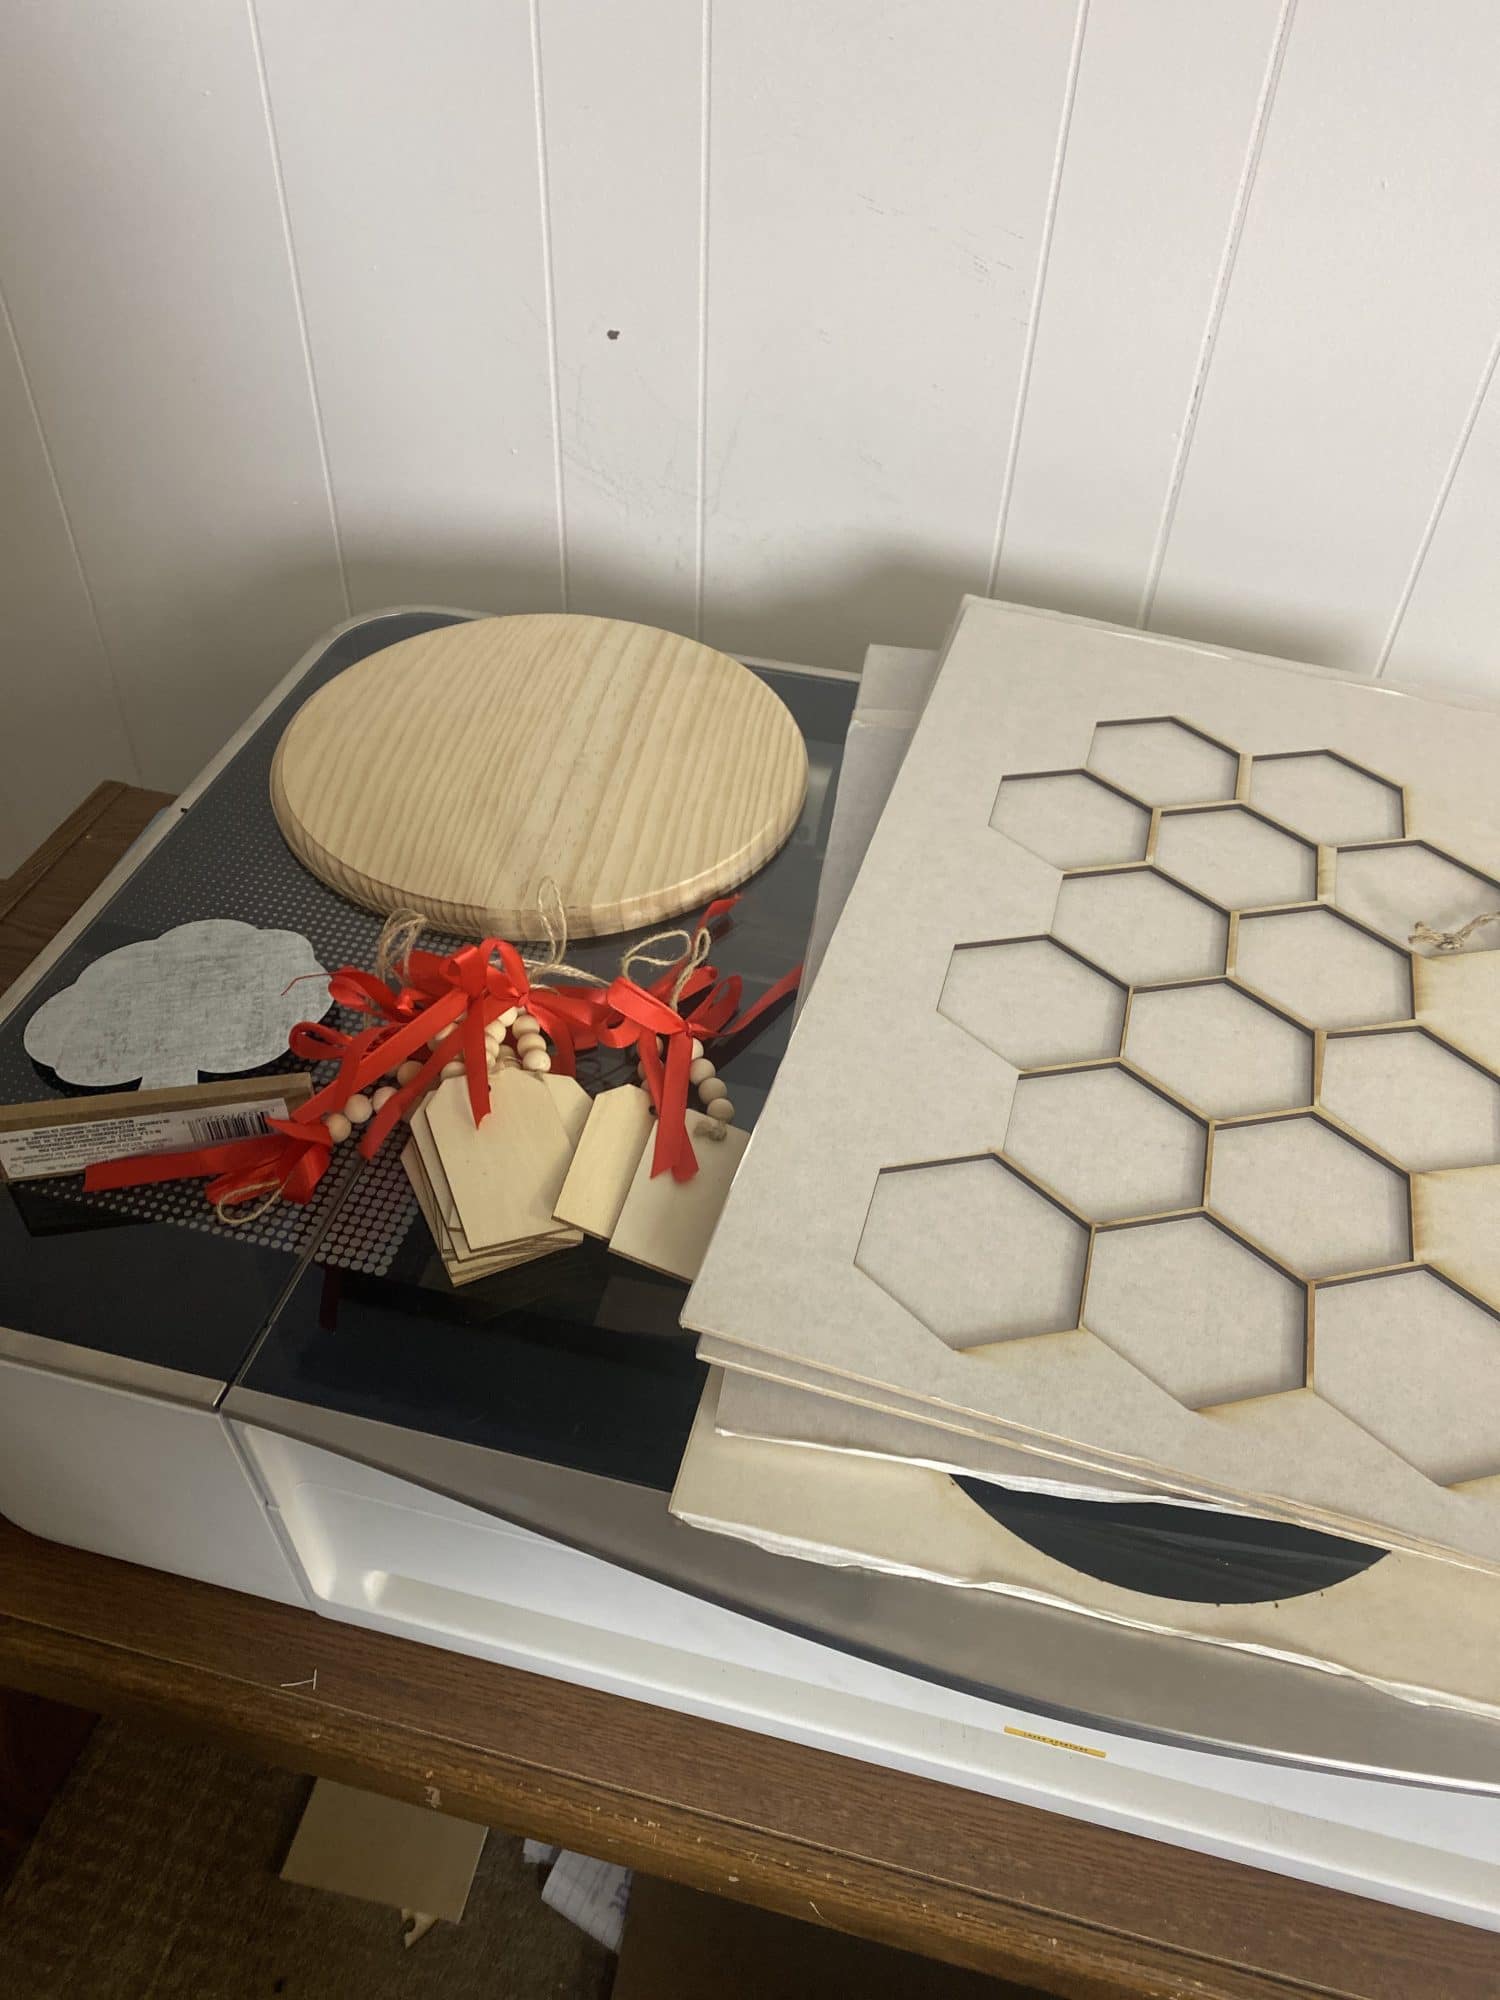 Glowforge is making materials that its laser cutters can automatically  recognize